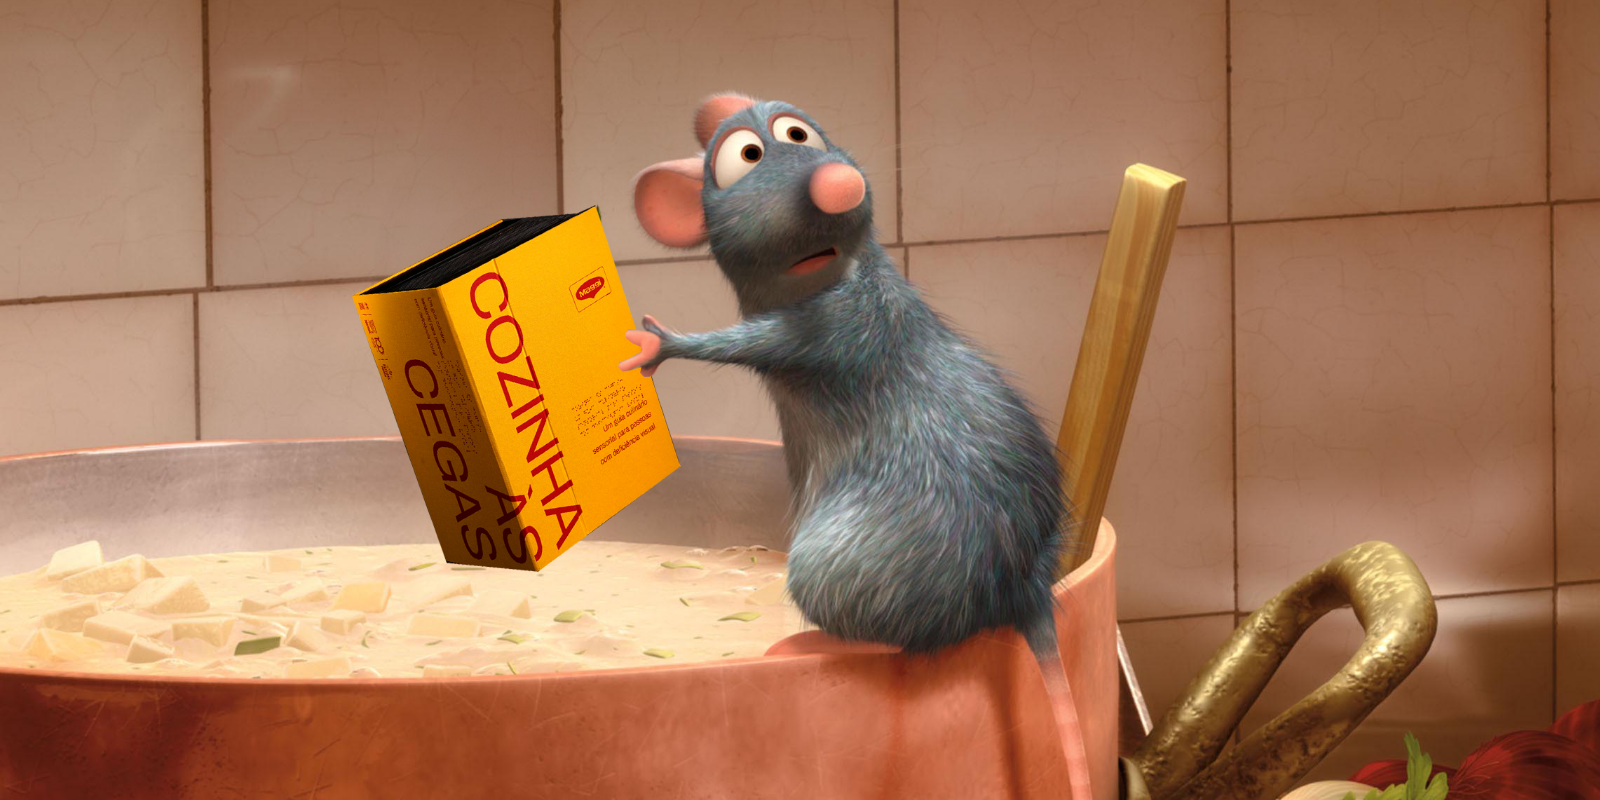 Animated image of Remy the rat from Disney Pixar's Ratatouille, holding a copy of Cooking Blindly